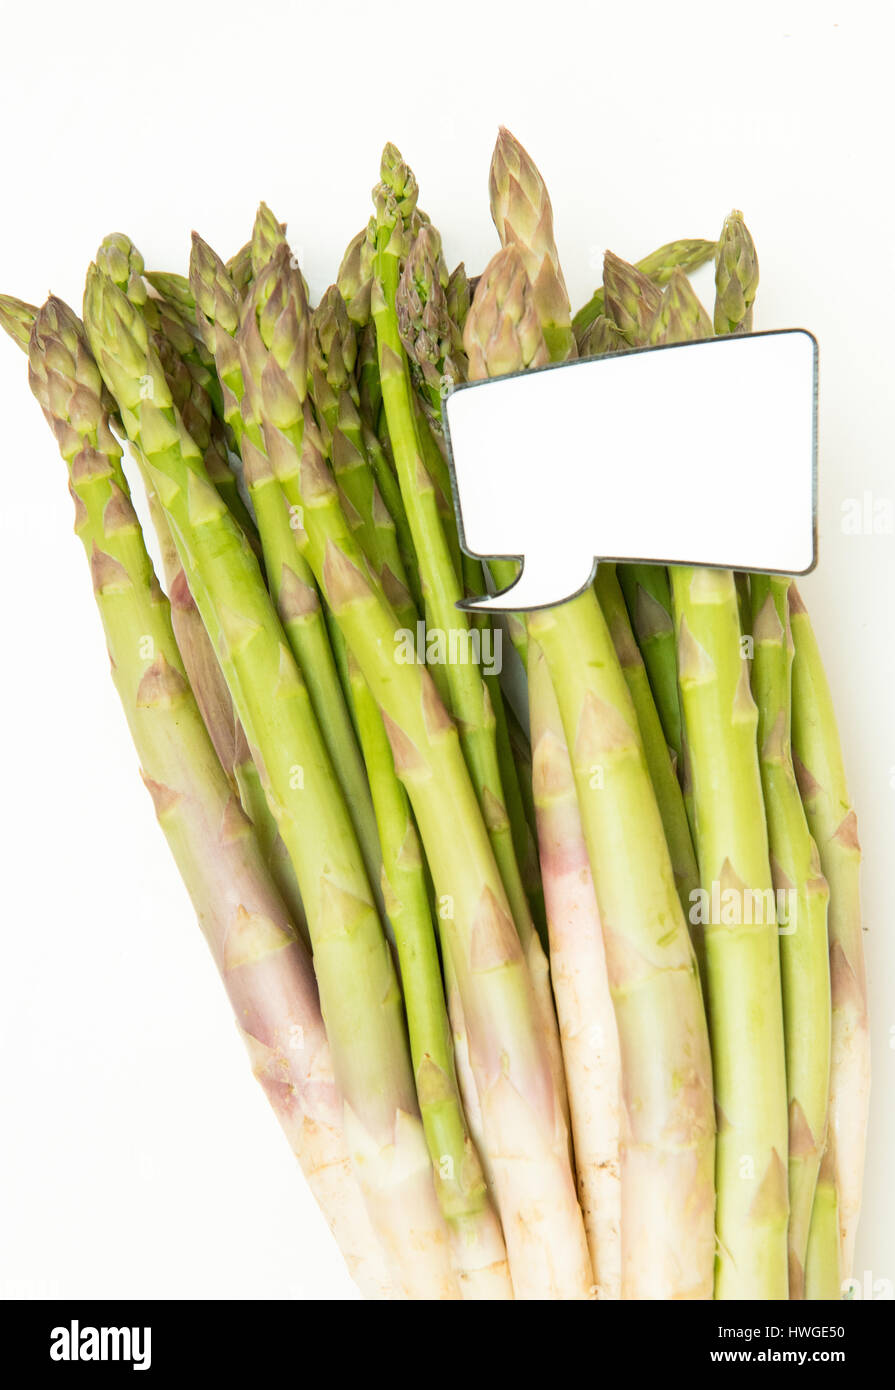 Bunch of fresh raw uncoocked asparagus and  funny comic style label for market price vertical frame Stock Photo